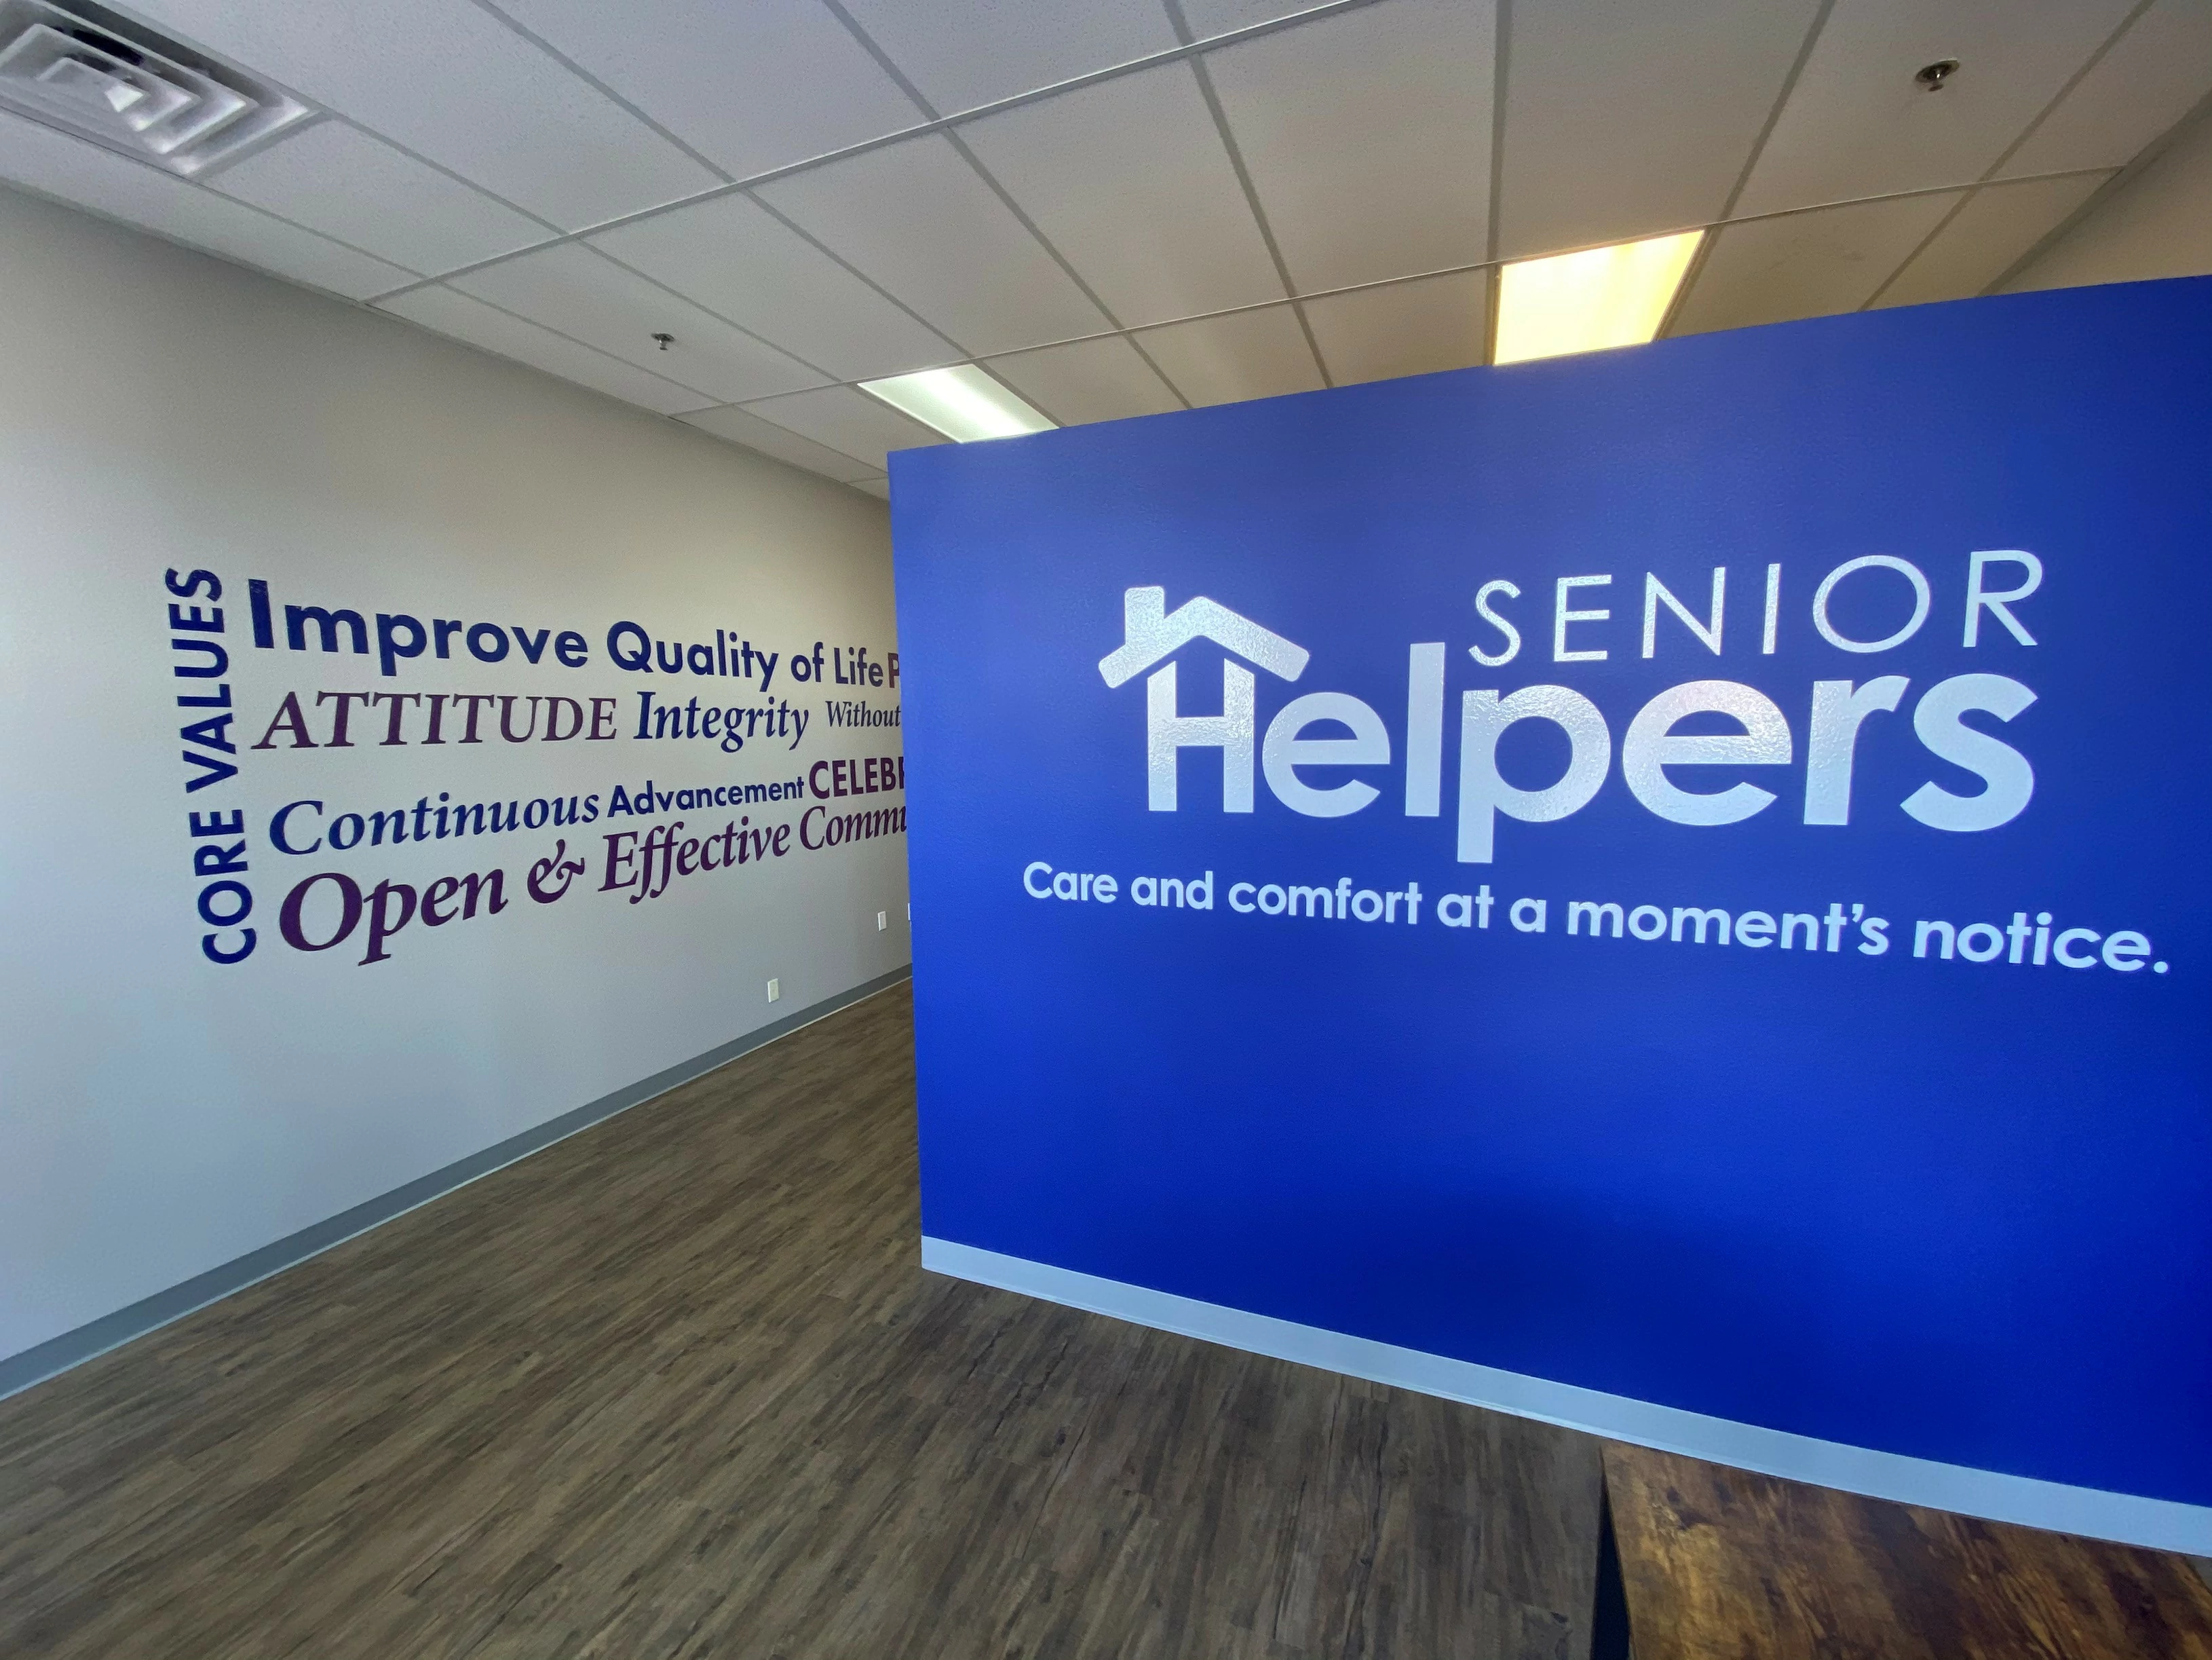 in-home care services in north las vegas, nv | senior helpers